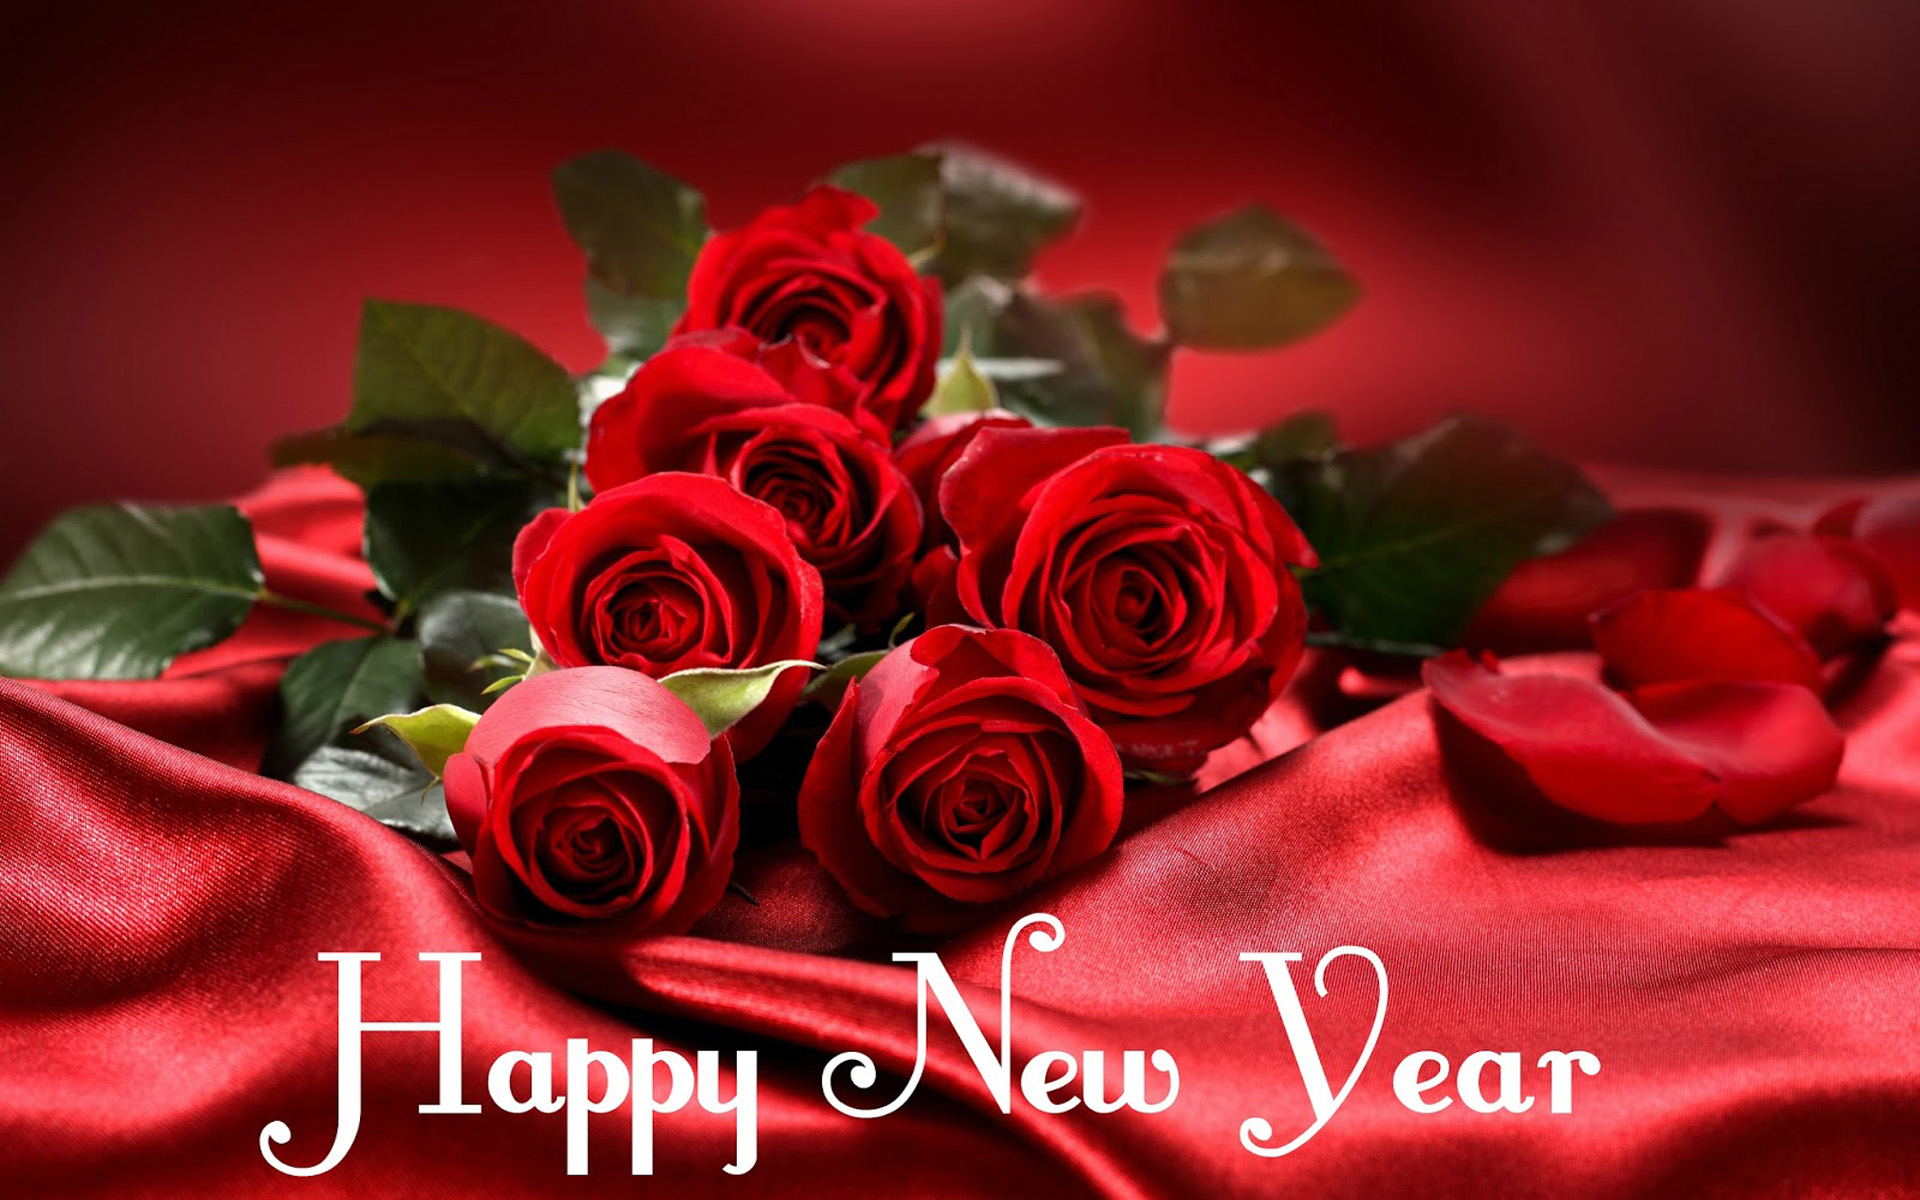 Happy New Year Red Roses Flower Image Greeting Card